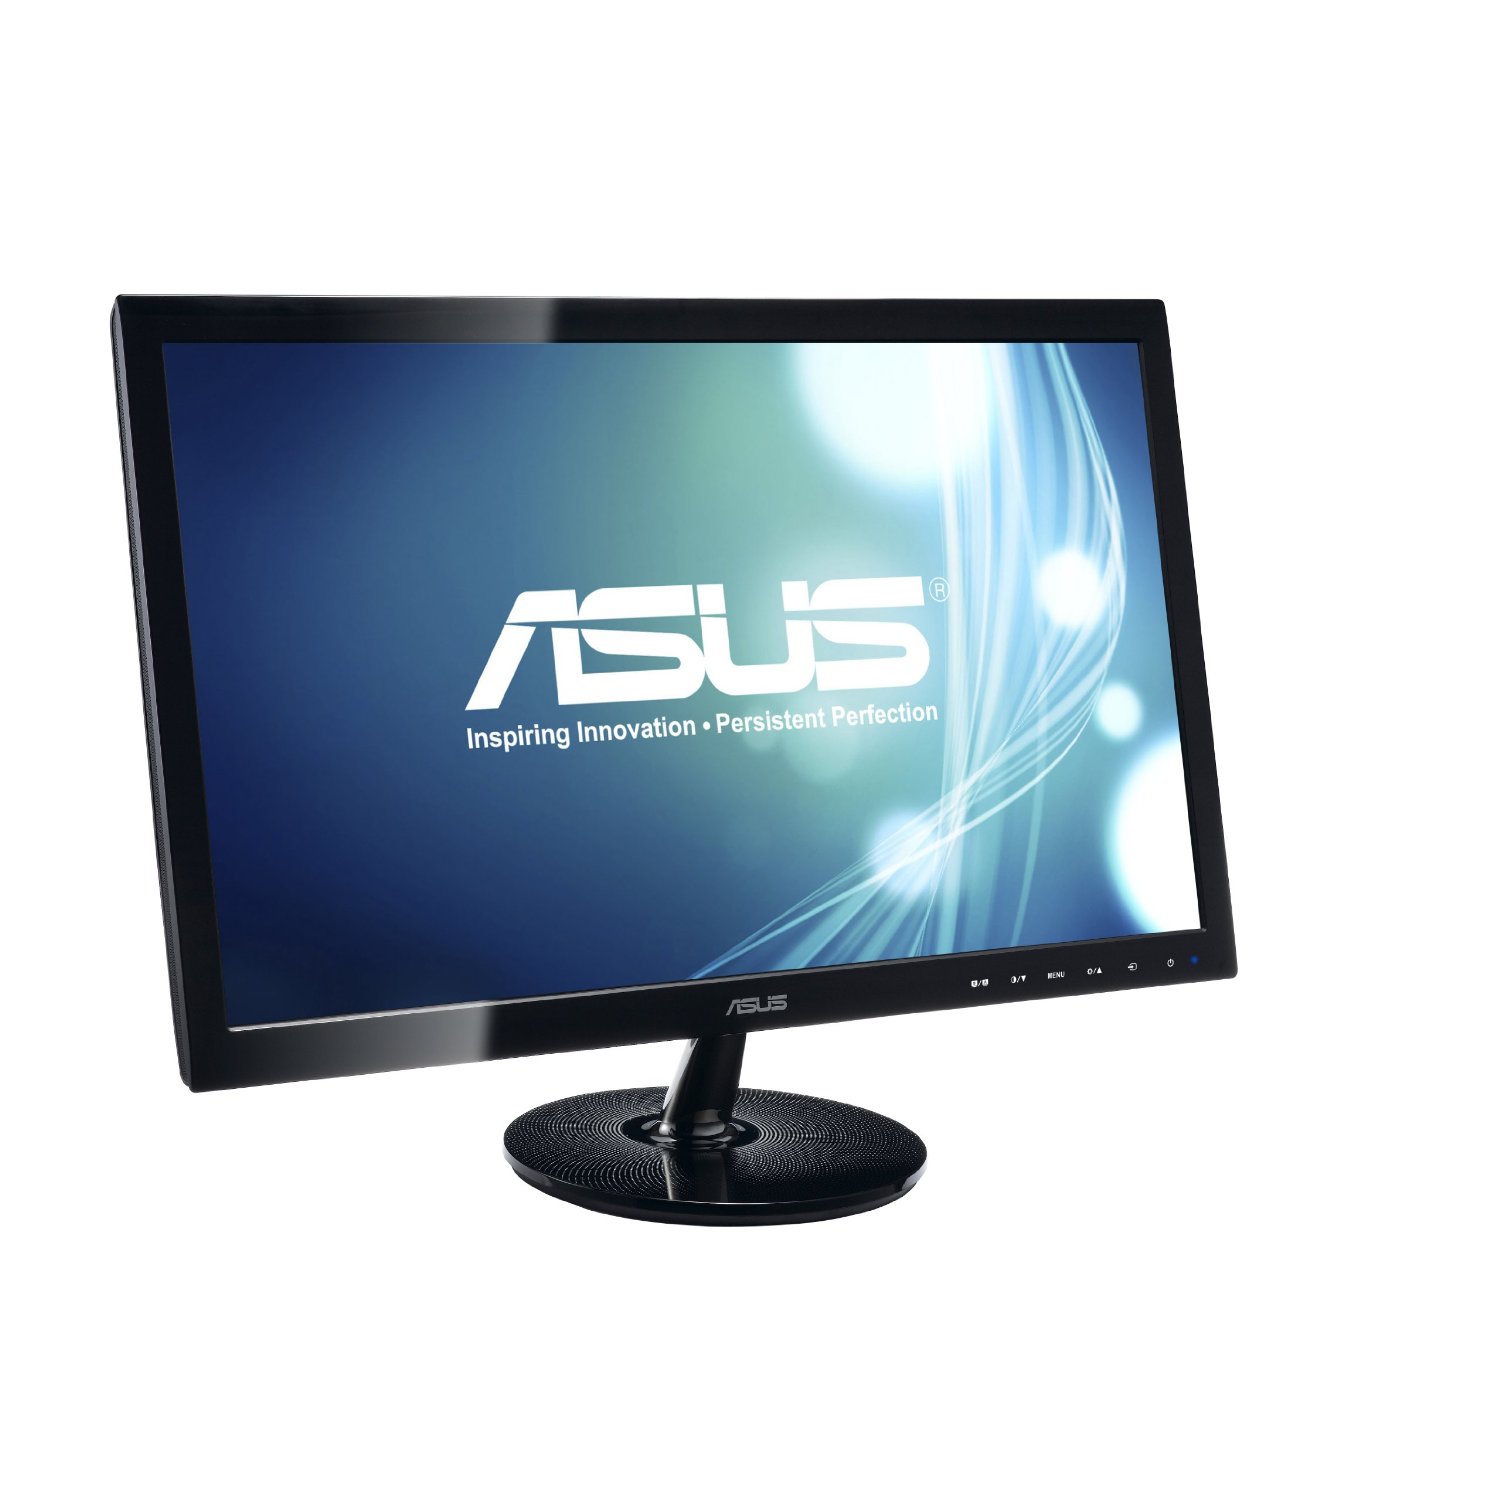 http://thetechjournal.com/wp-content/uploads/images/1206/1340551232-asus-vs248hp-24inch-fullhd-led-monitor-5.jpg